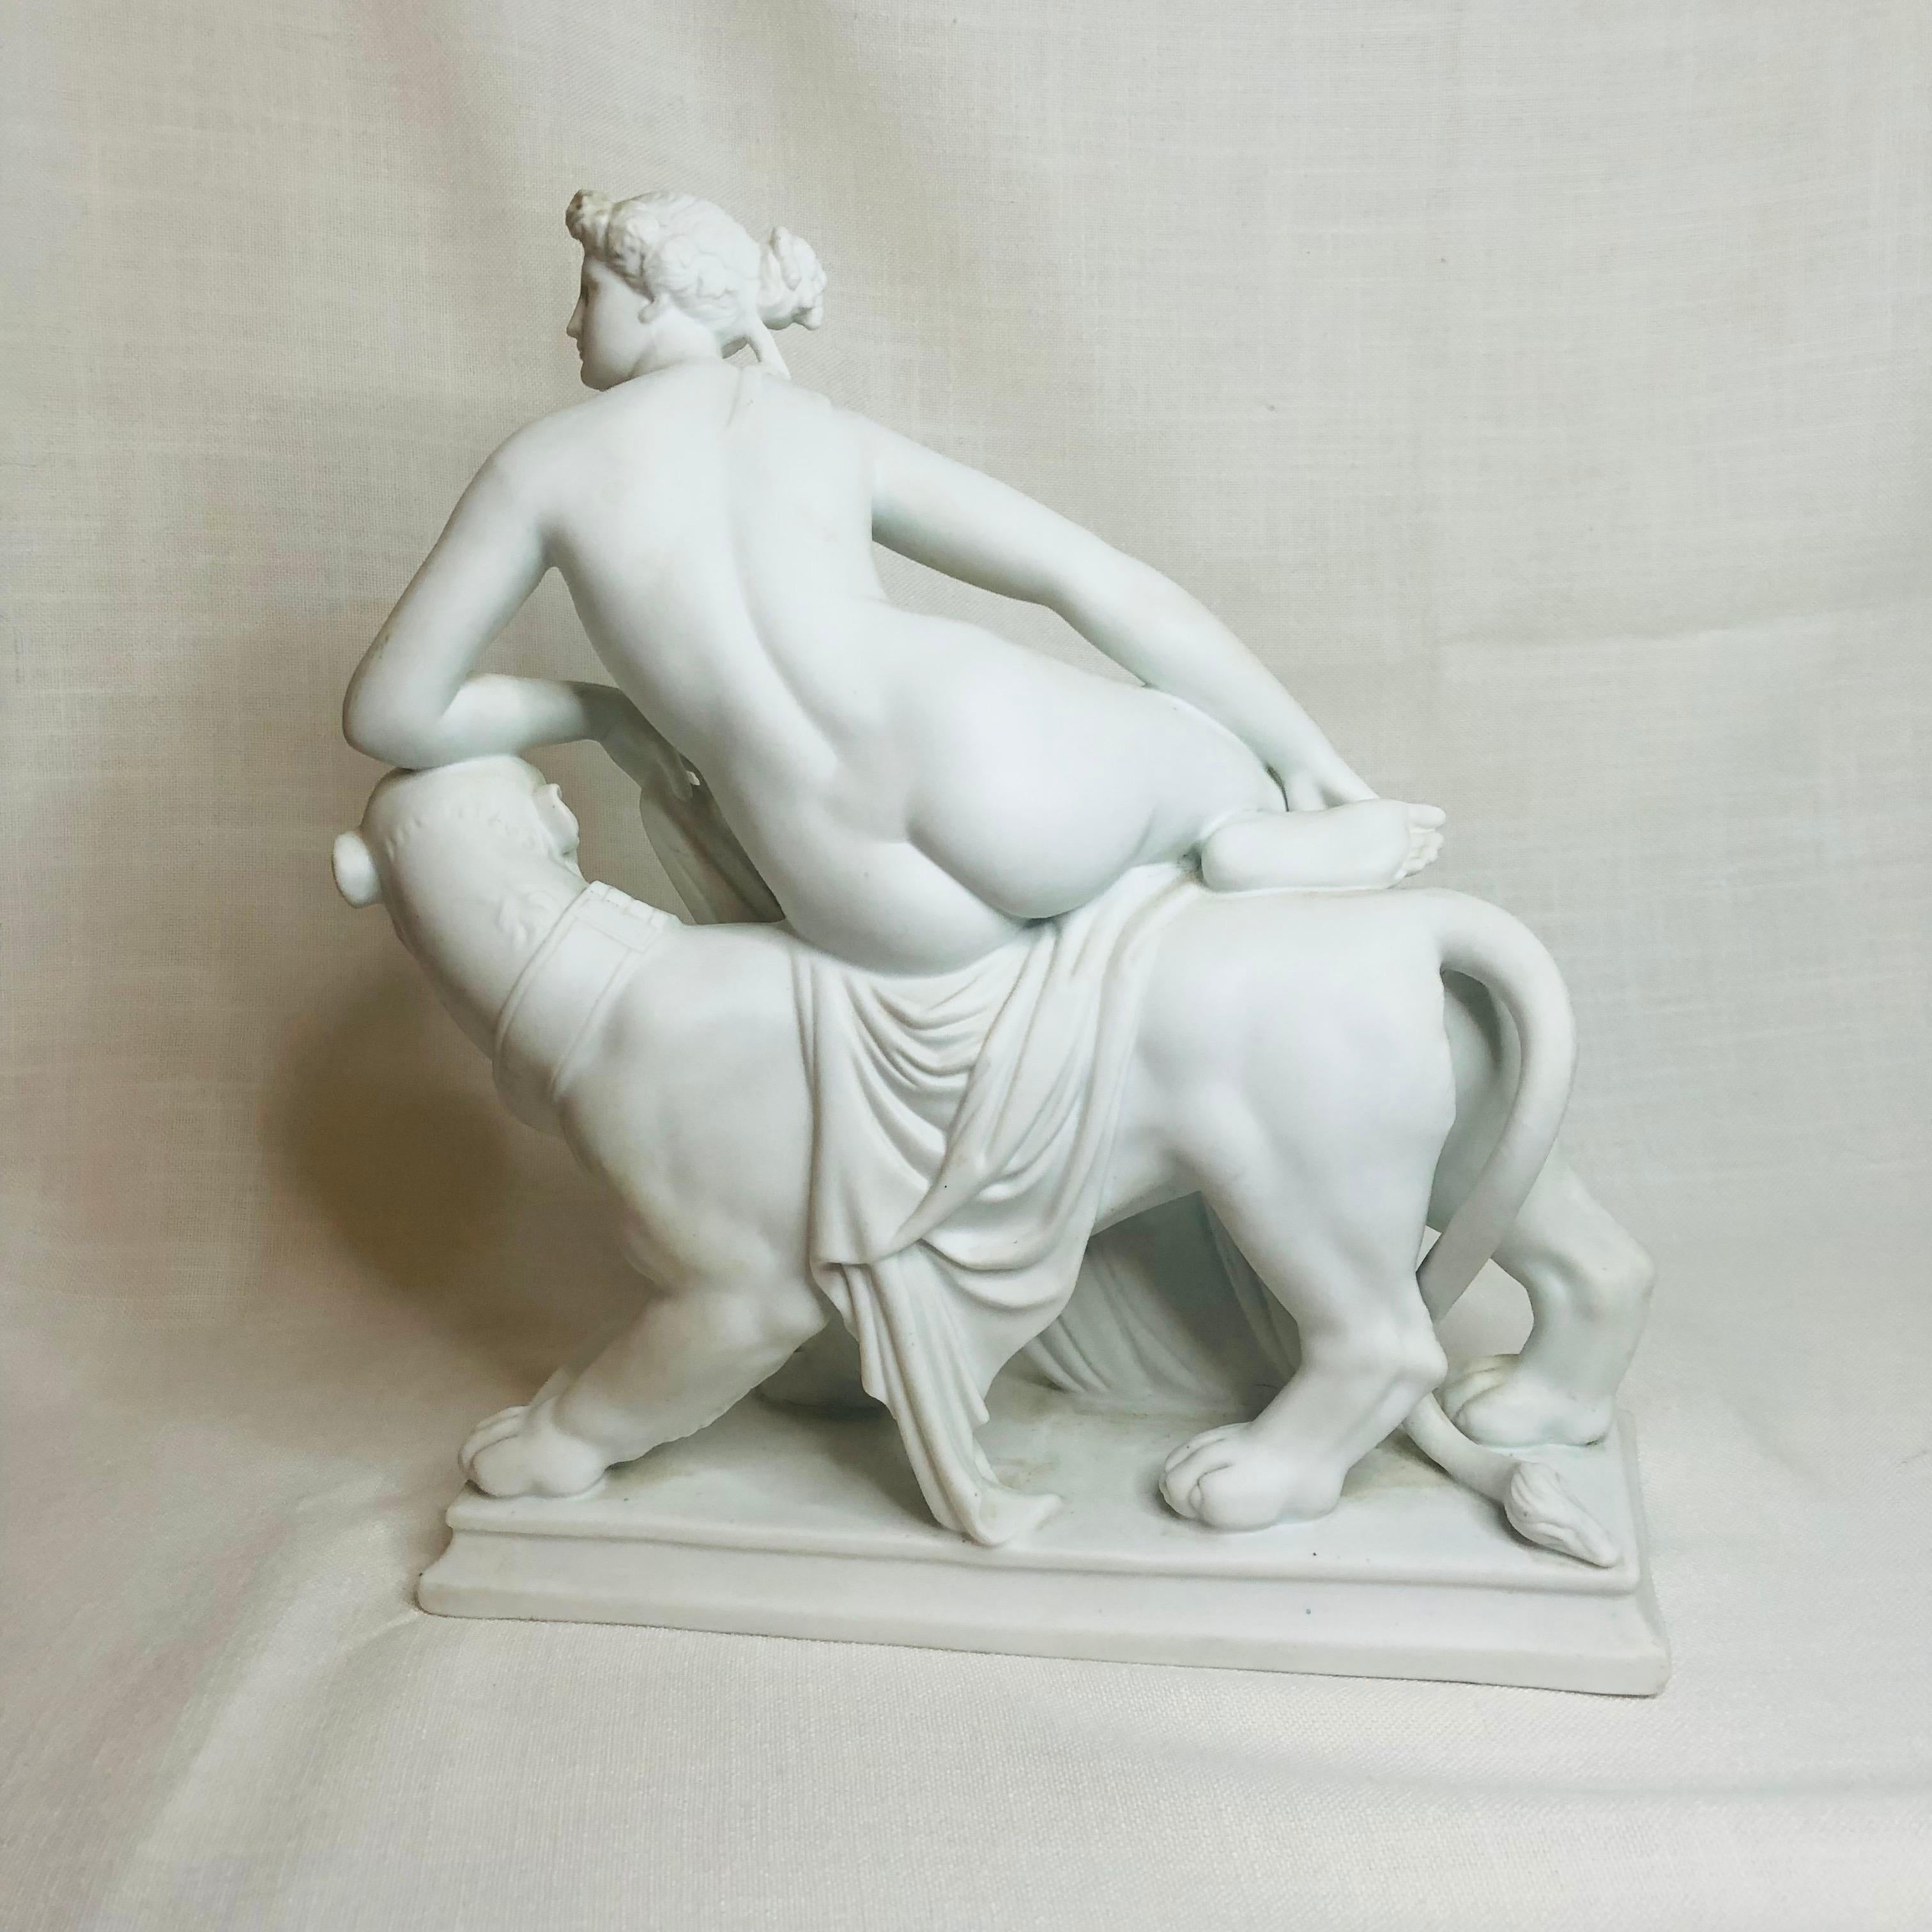 English Parian Figurine of a Nude Figure of Adriadne Riding on Top of a Panther 6